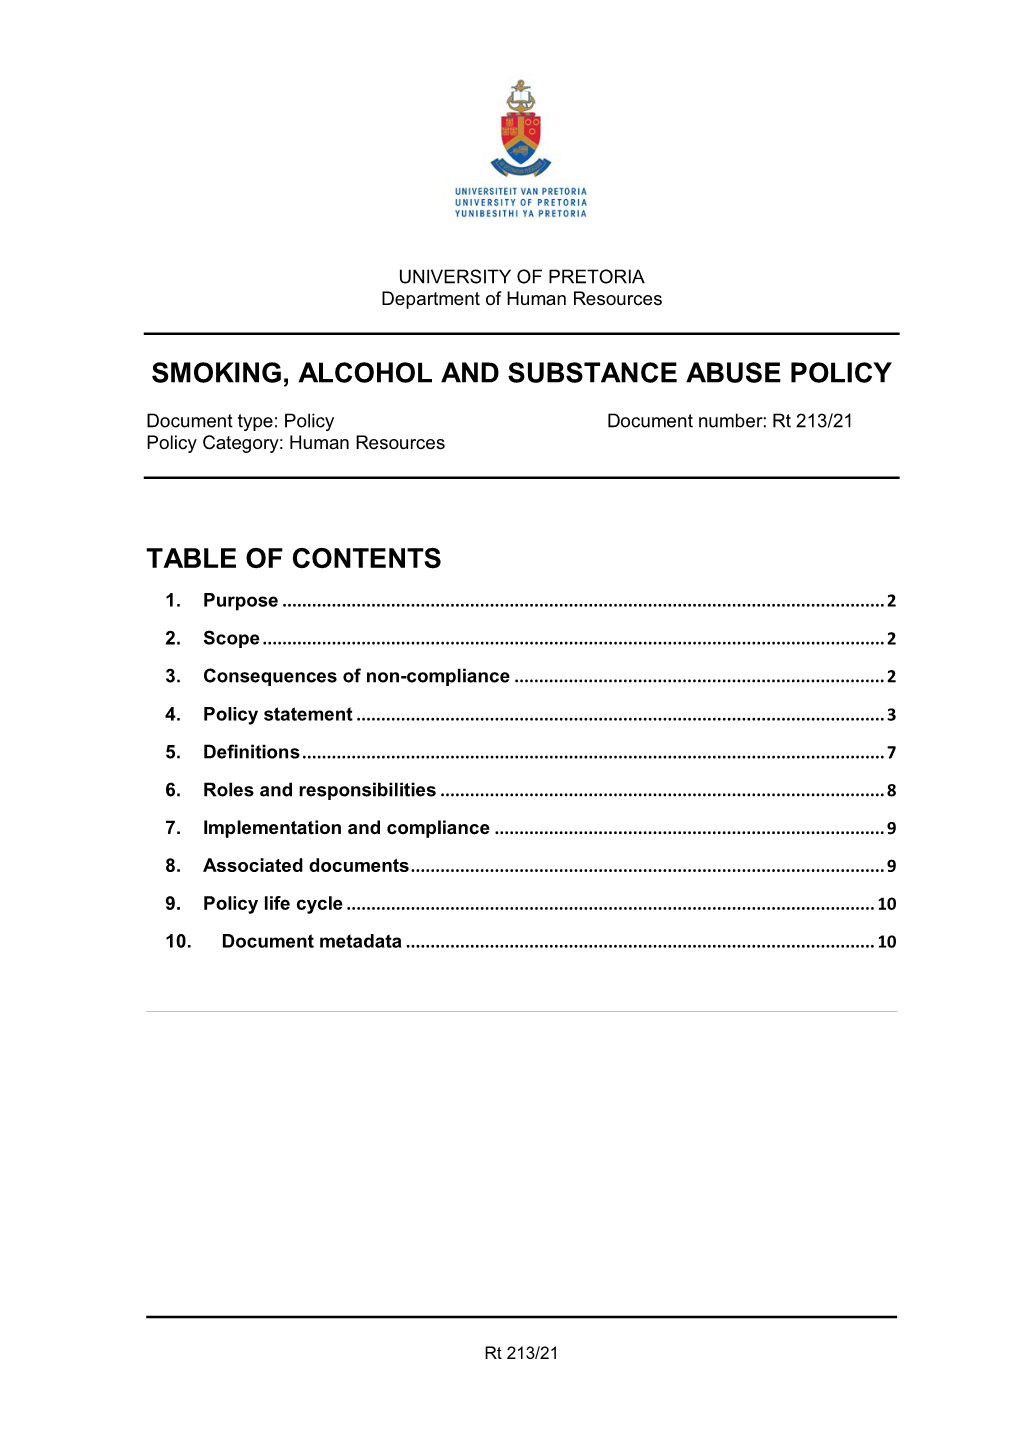 Smoking, Alcohol and Substance Abuse Policy